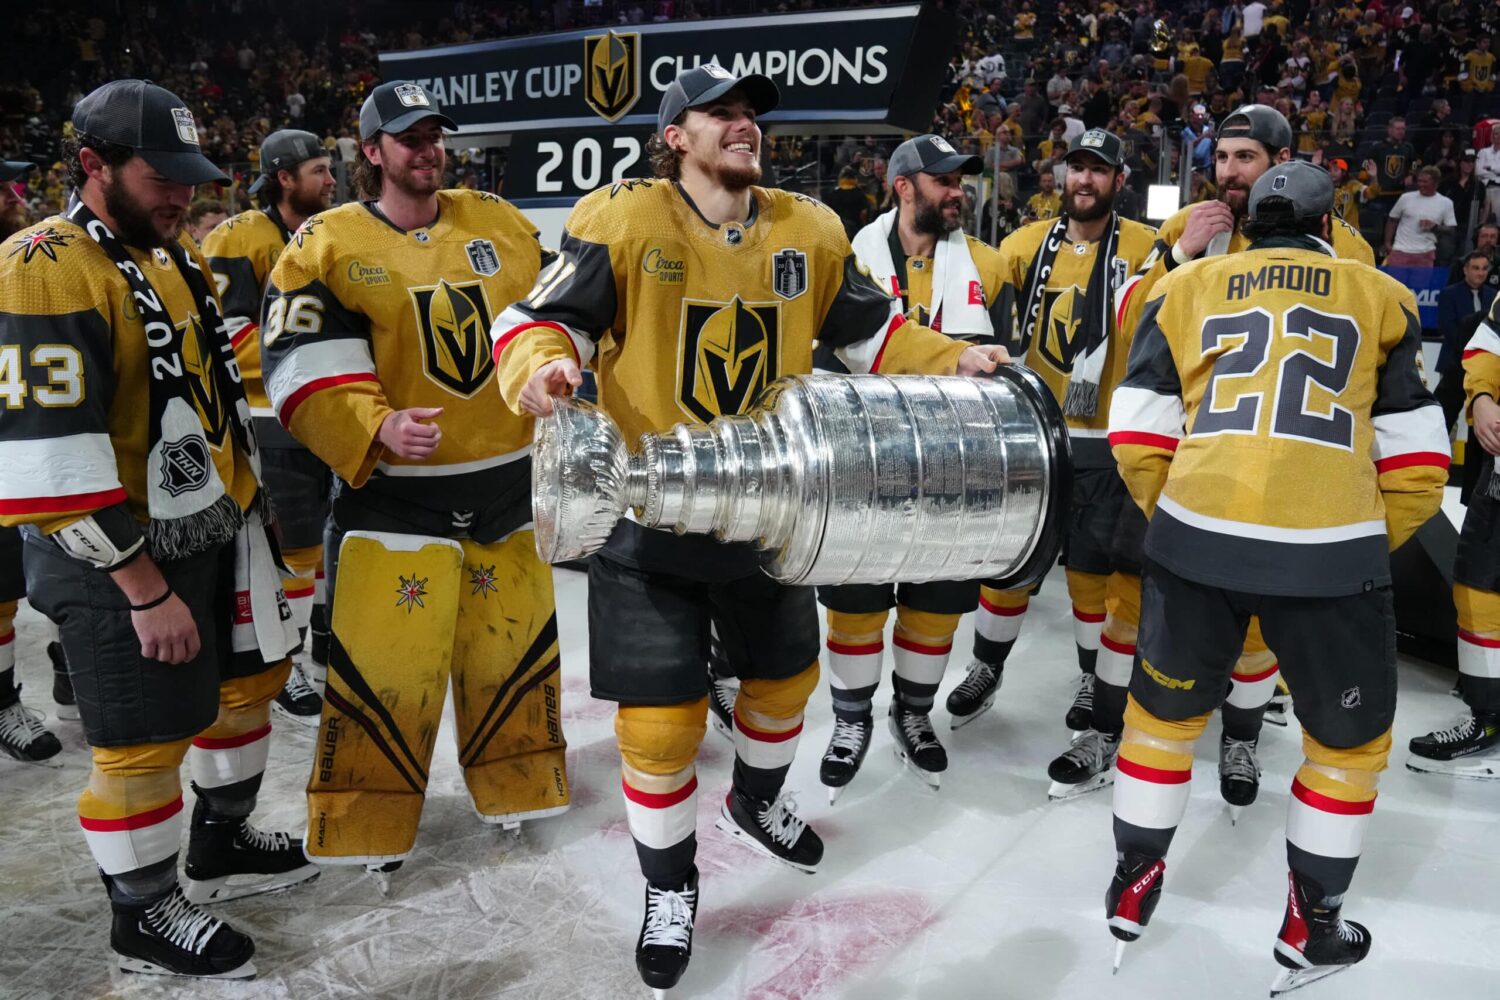 A Stanley Cup for house league hockey